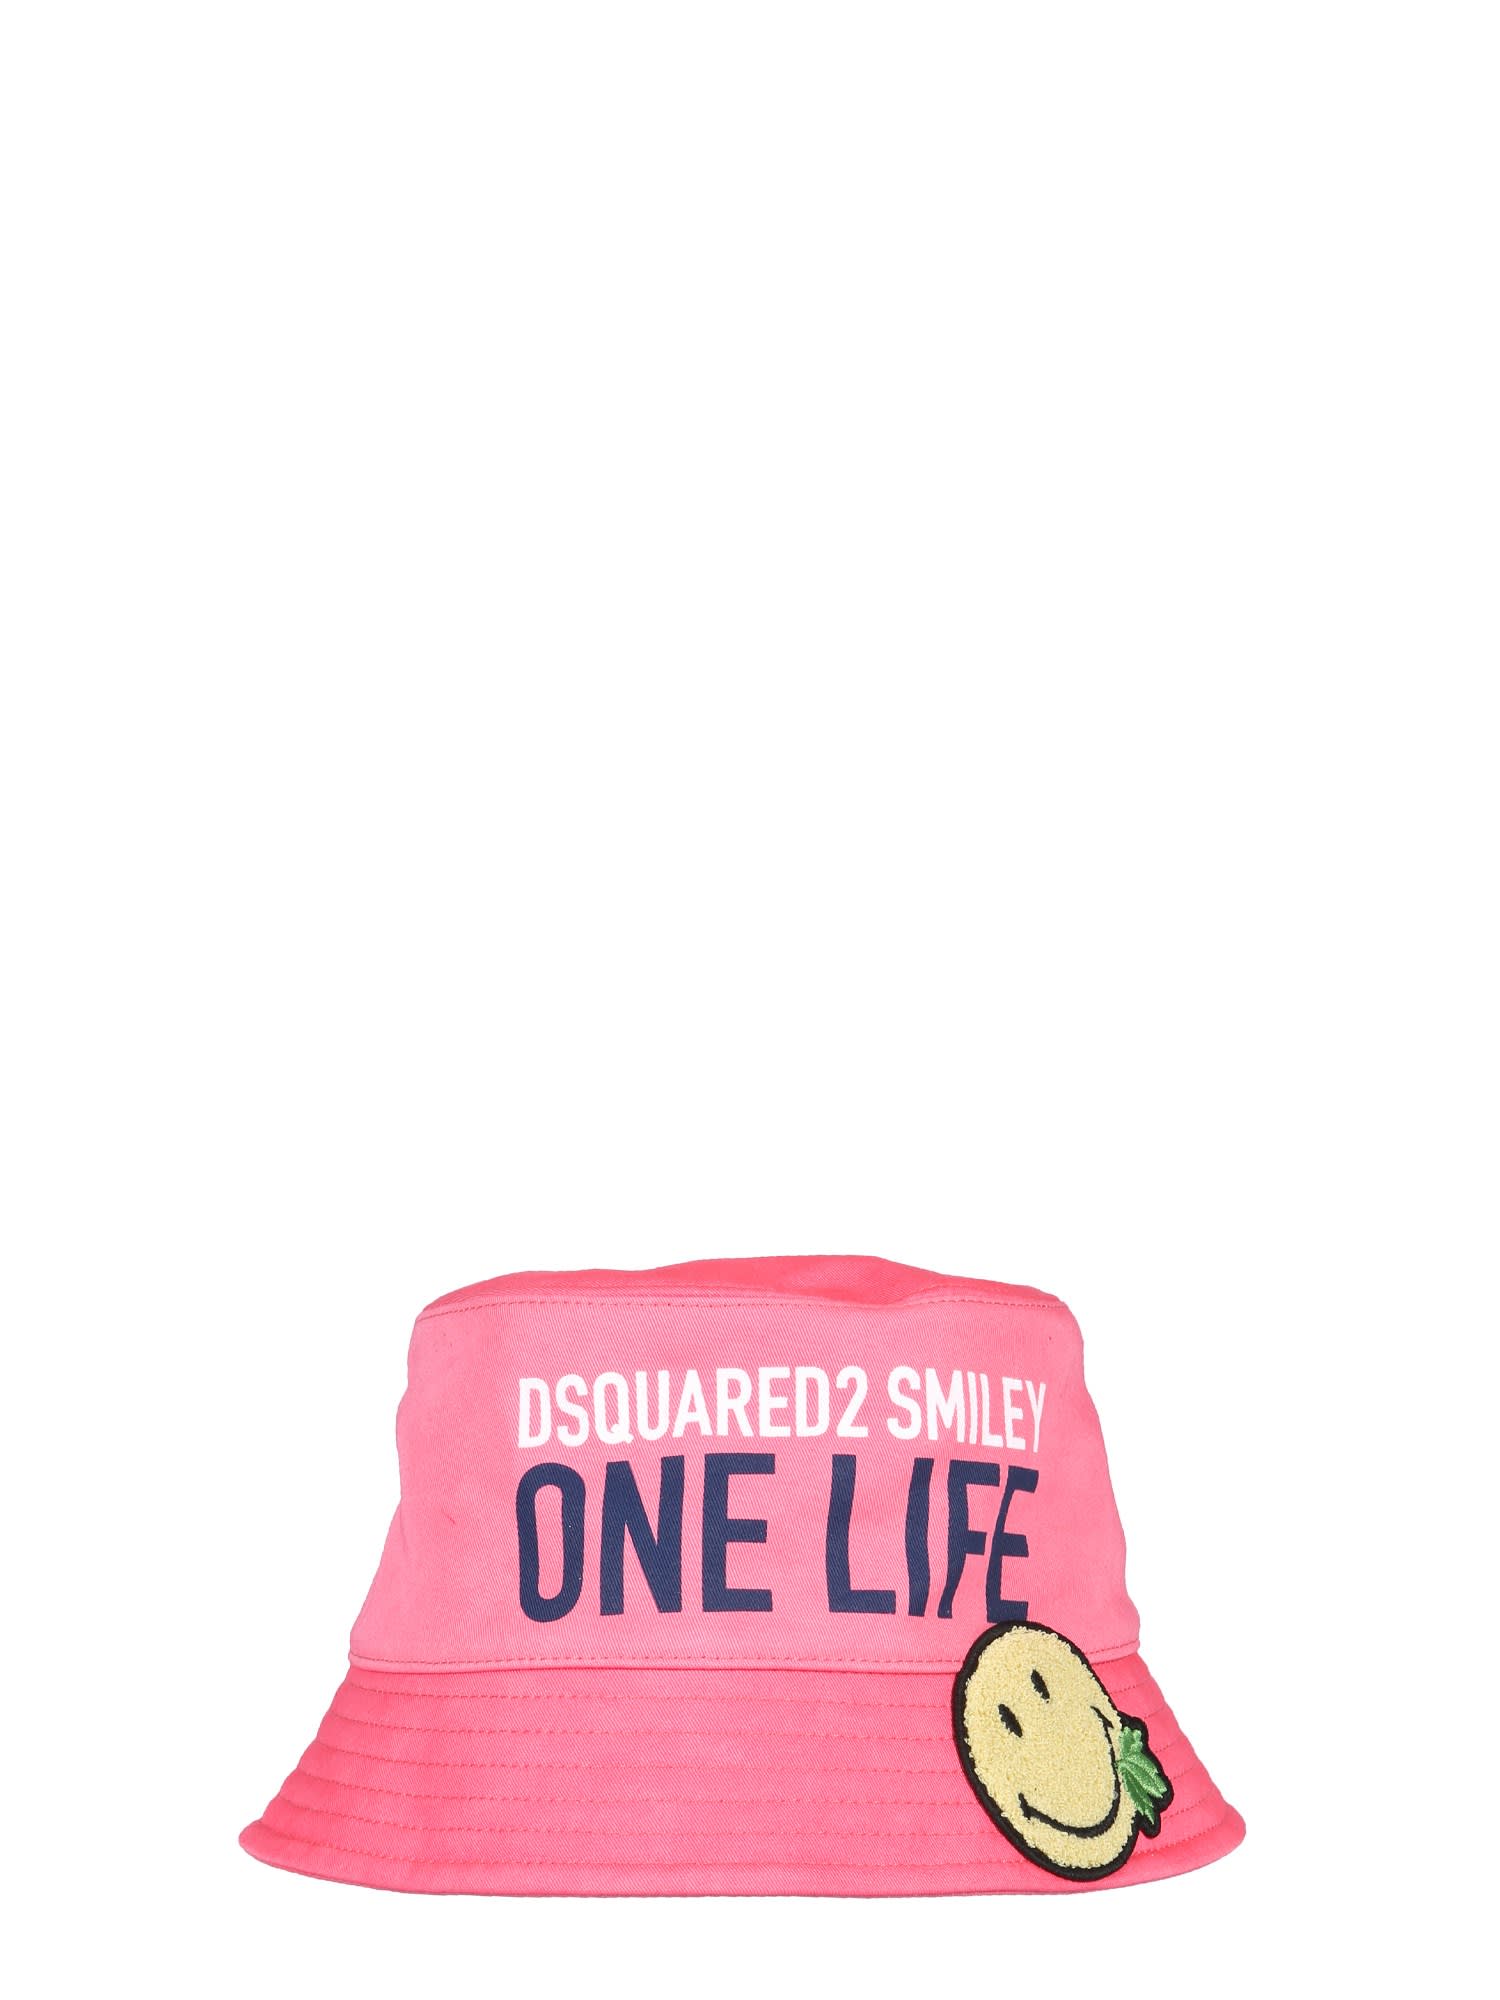 DSQUARED2 ONE LIFE ONE PLANET SMILEY BUCKET HAT